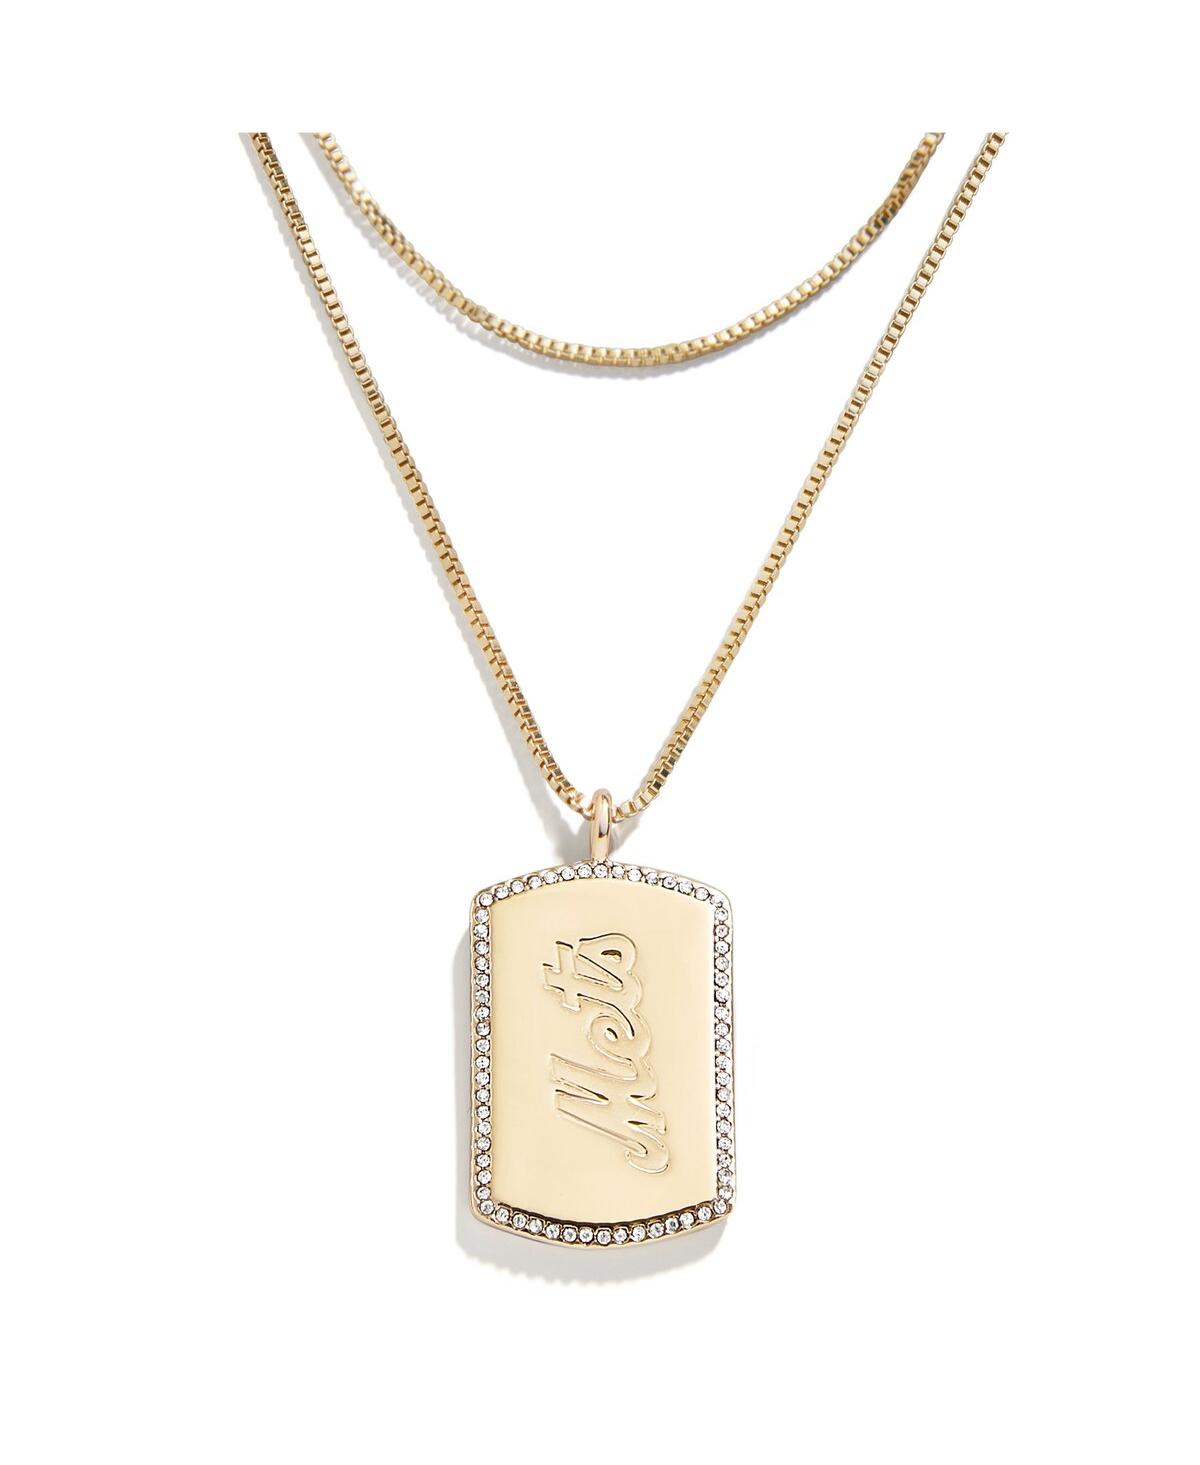 Wear By Erin Andrews Women's  X Baublebar New York Mets Dog Tag Necklace In Gold